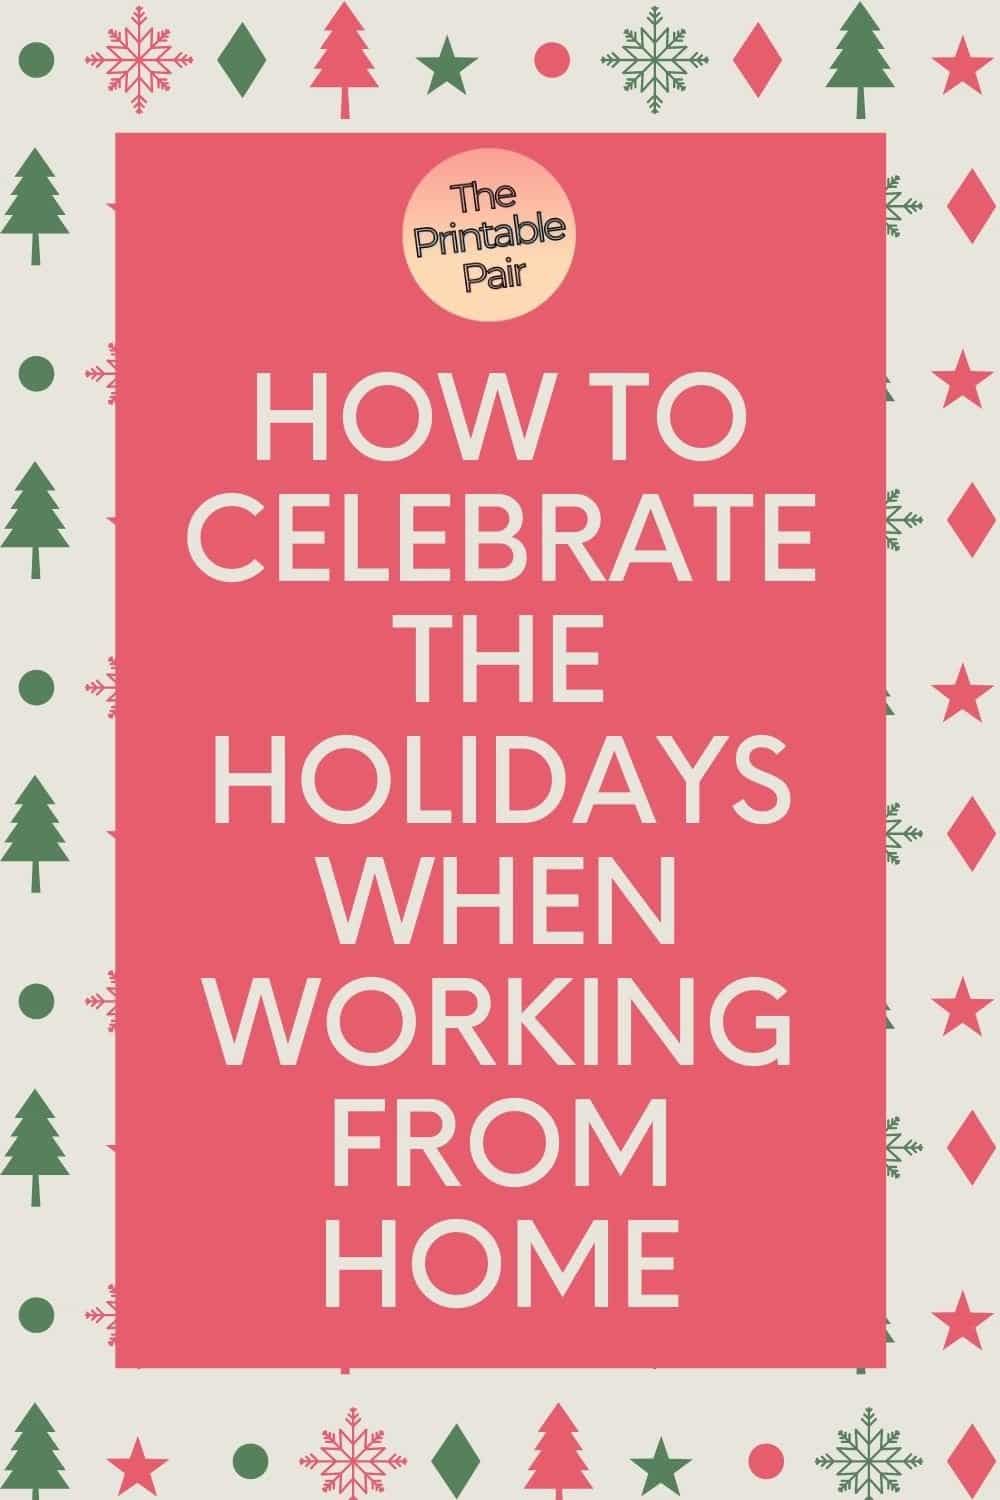 How to Celebrate the Holidays When Working From Home